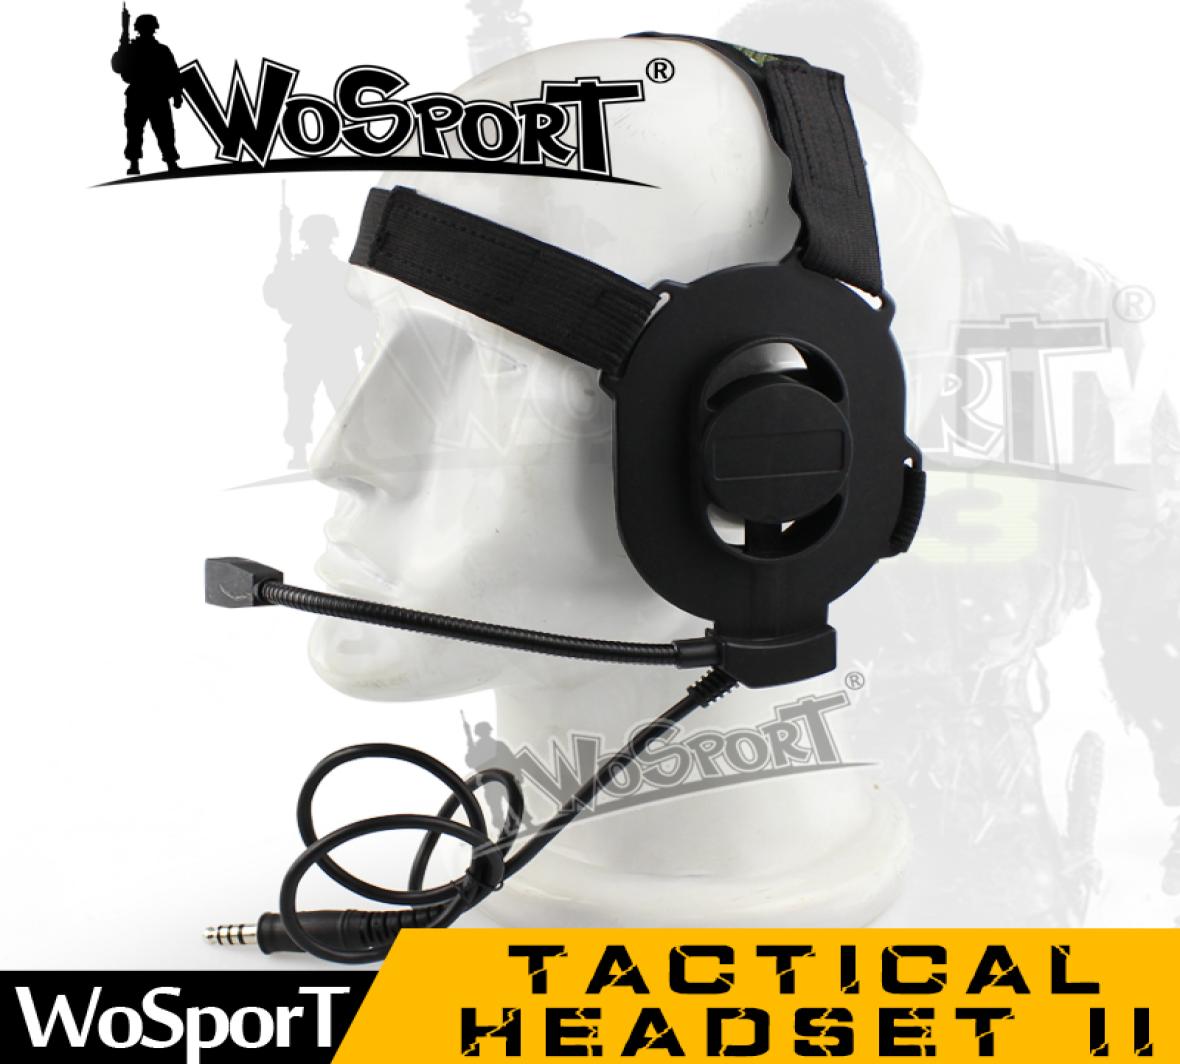 

Tactical Noise Reduction Headset II with Airsoft Mic NATO Noise Canceling for Walkie Talkie Helmet Communication2162338, Tan